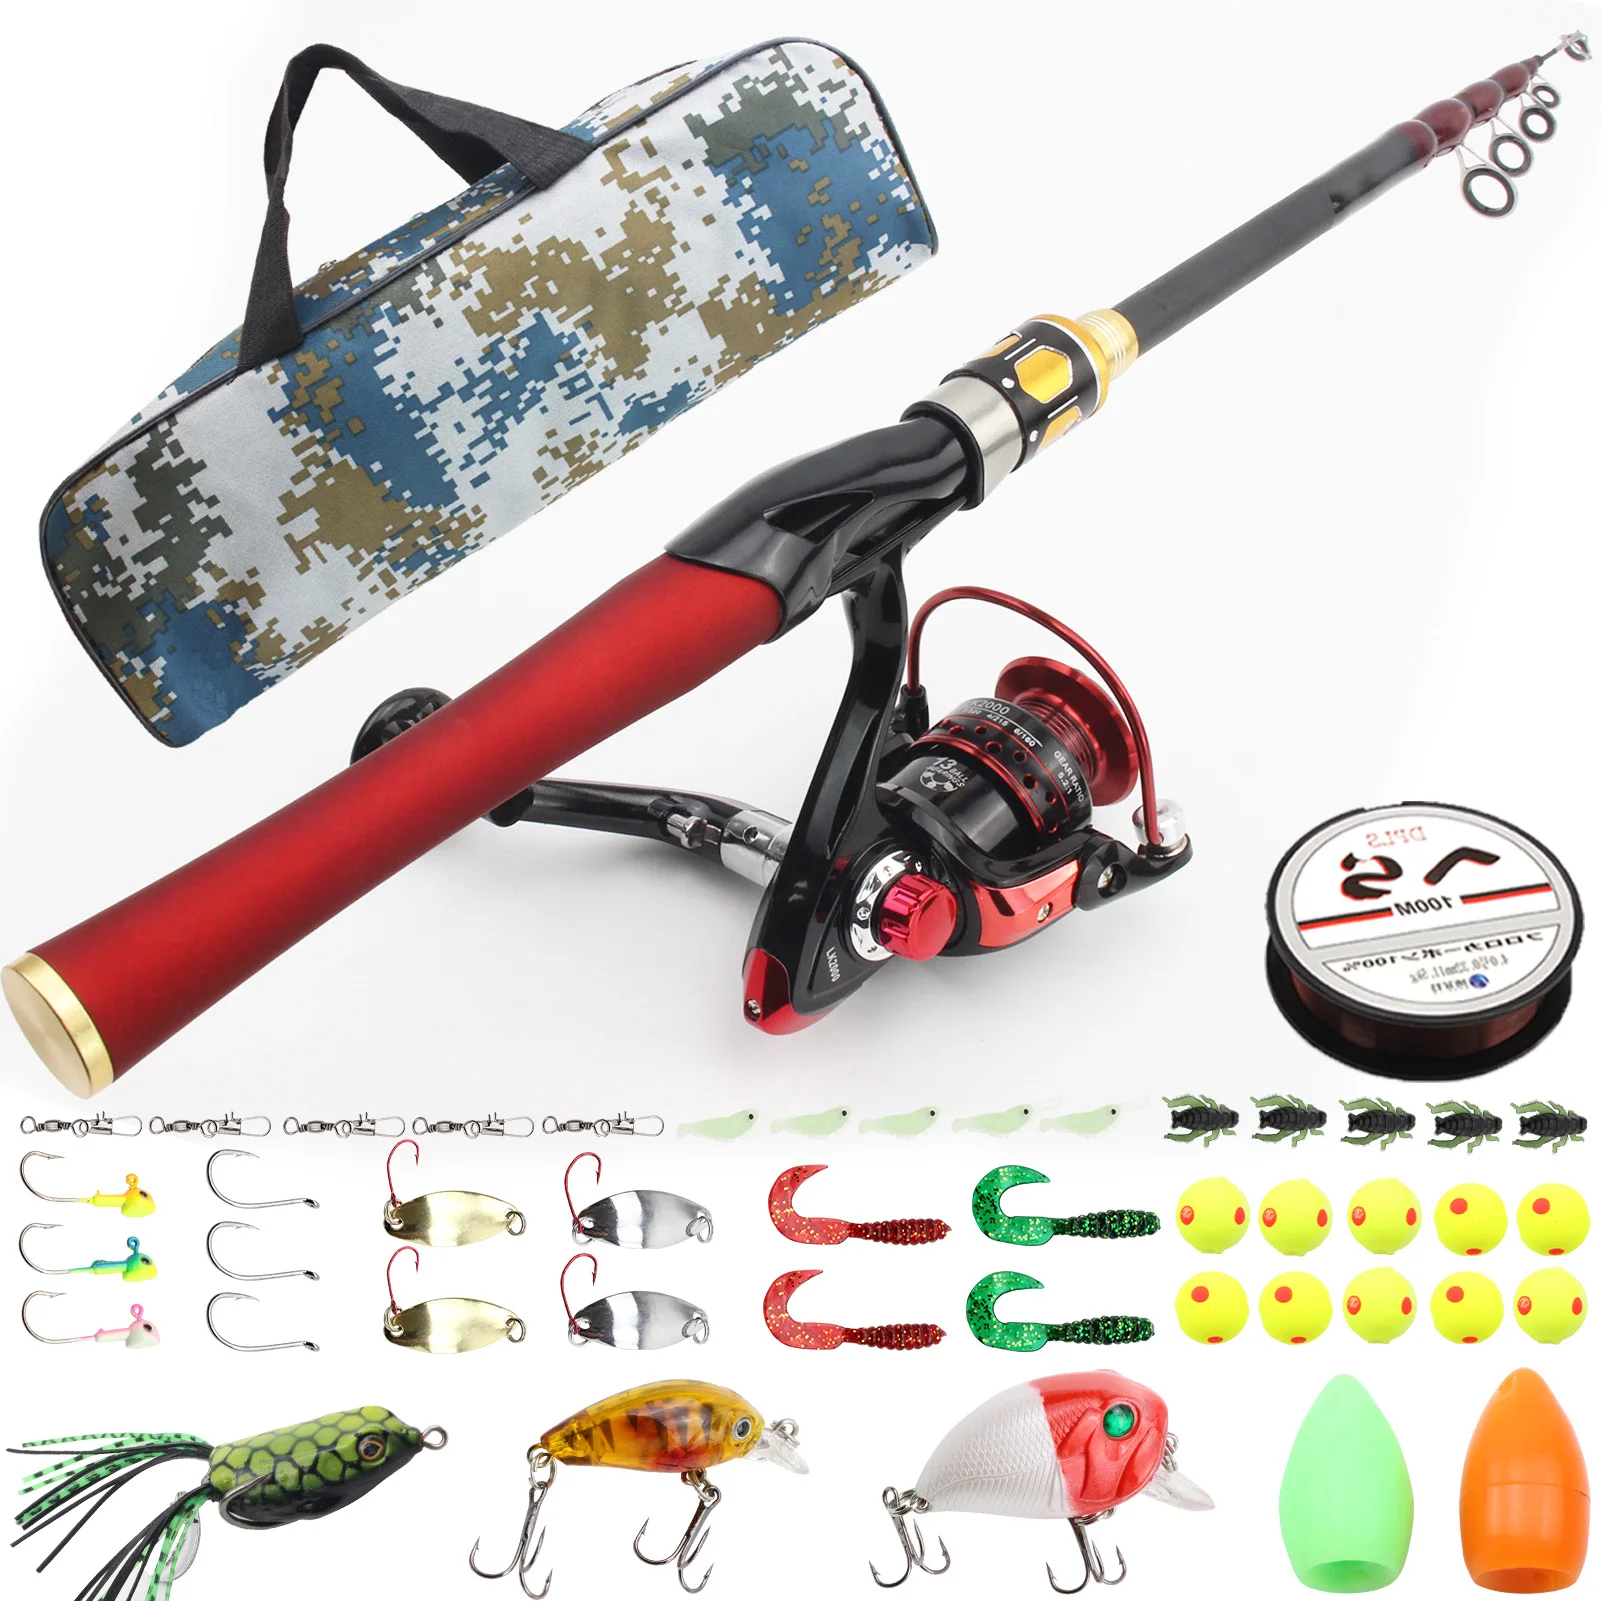 

2.1M Fishing rod with reel Casting Rod and reel Soft bait Fish hook bag set Travel lure Trout Portable telescopic fishing rod